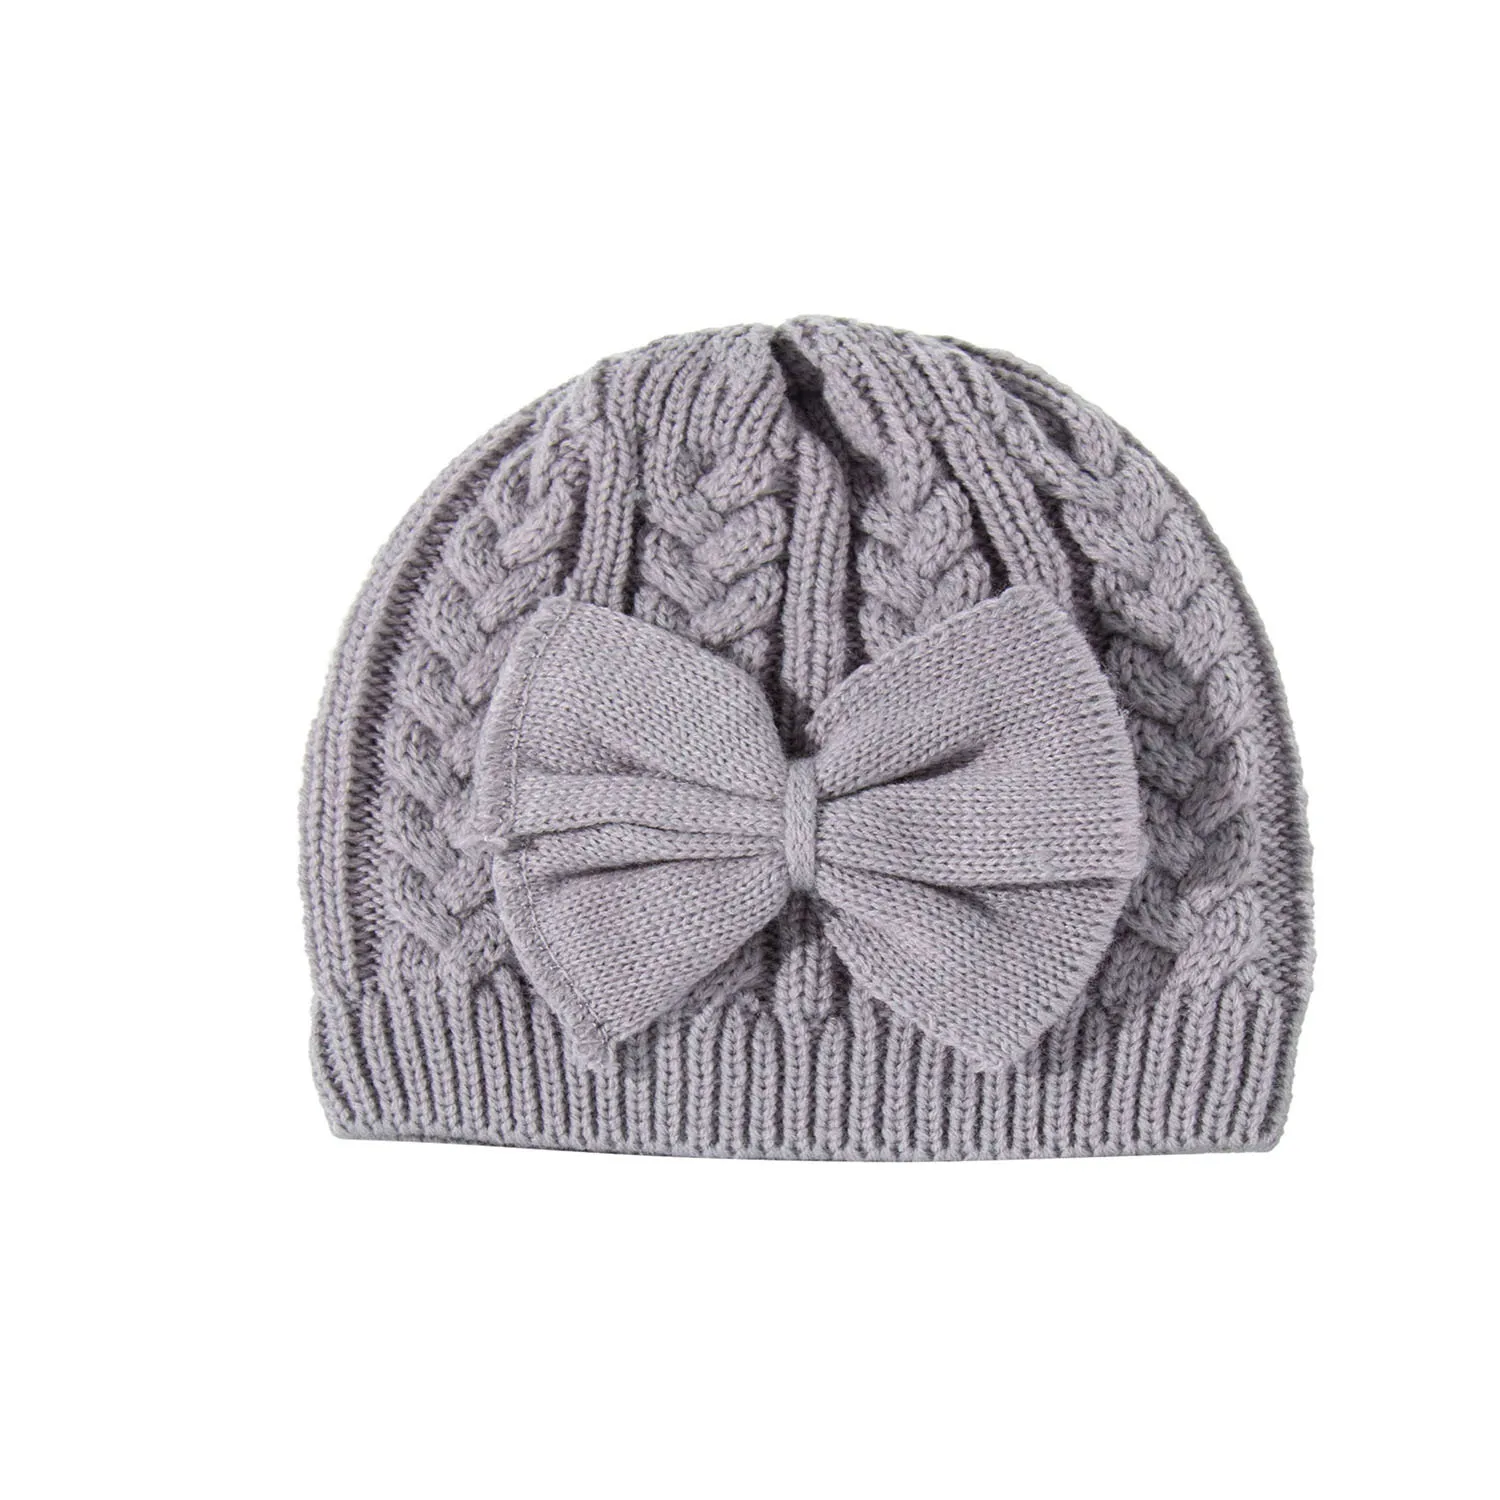 Newborn Knotted Bowknot Hat A Toddler Kids Infant Baby Boy Girl Warm Pleuche Bowknot Beanie Headwear Cap Hair Bands Cap Elastic Hat for School Travel Outing for 0-4 Years 